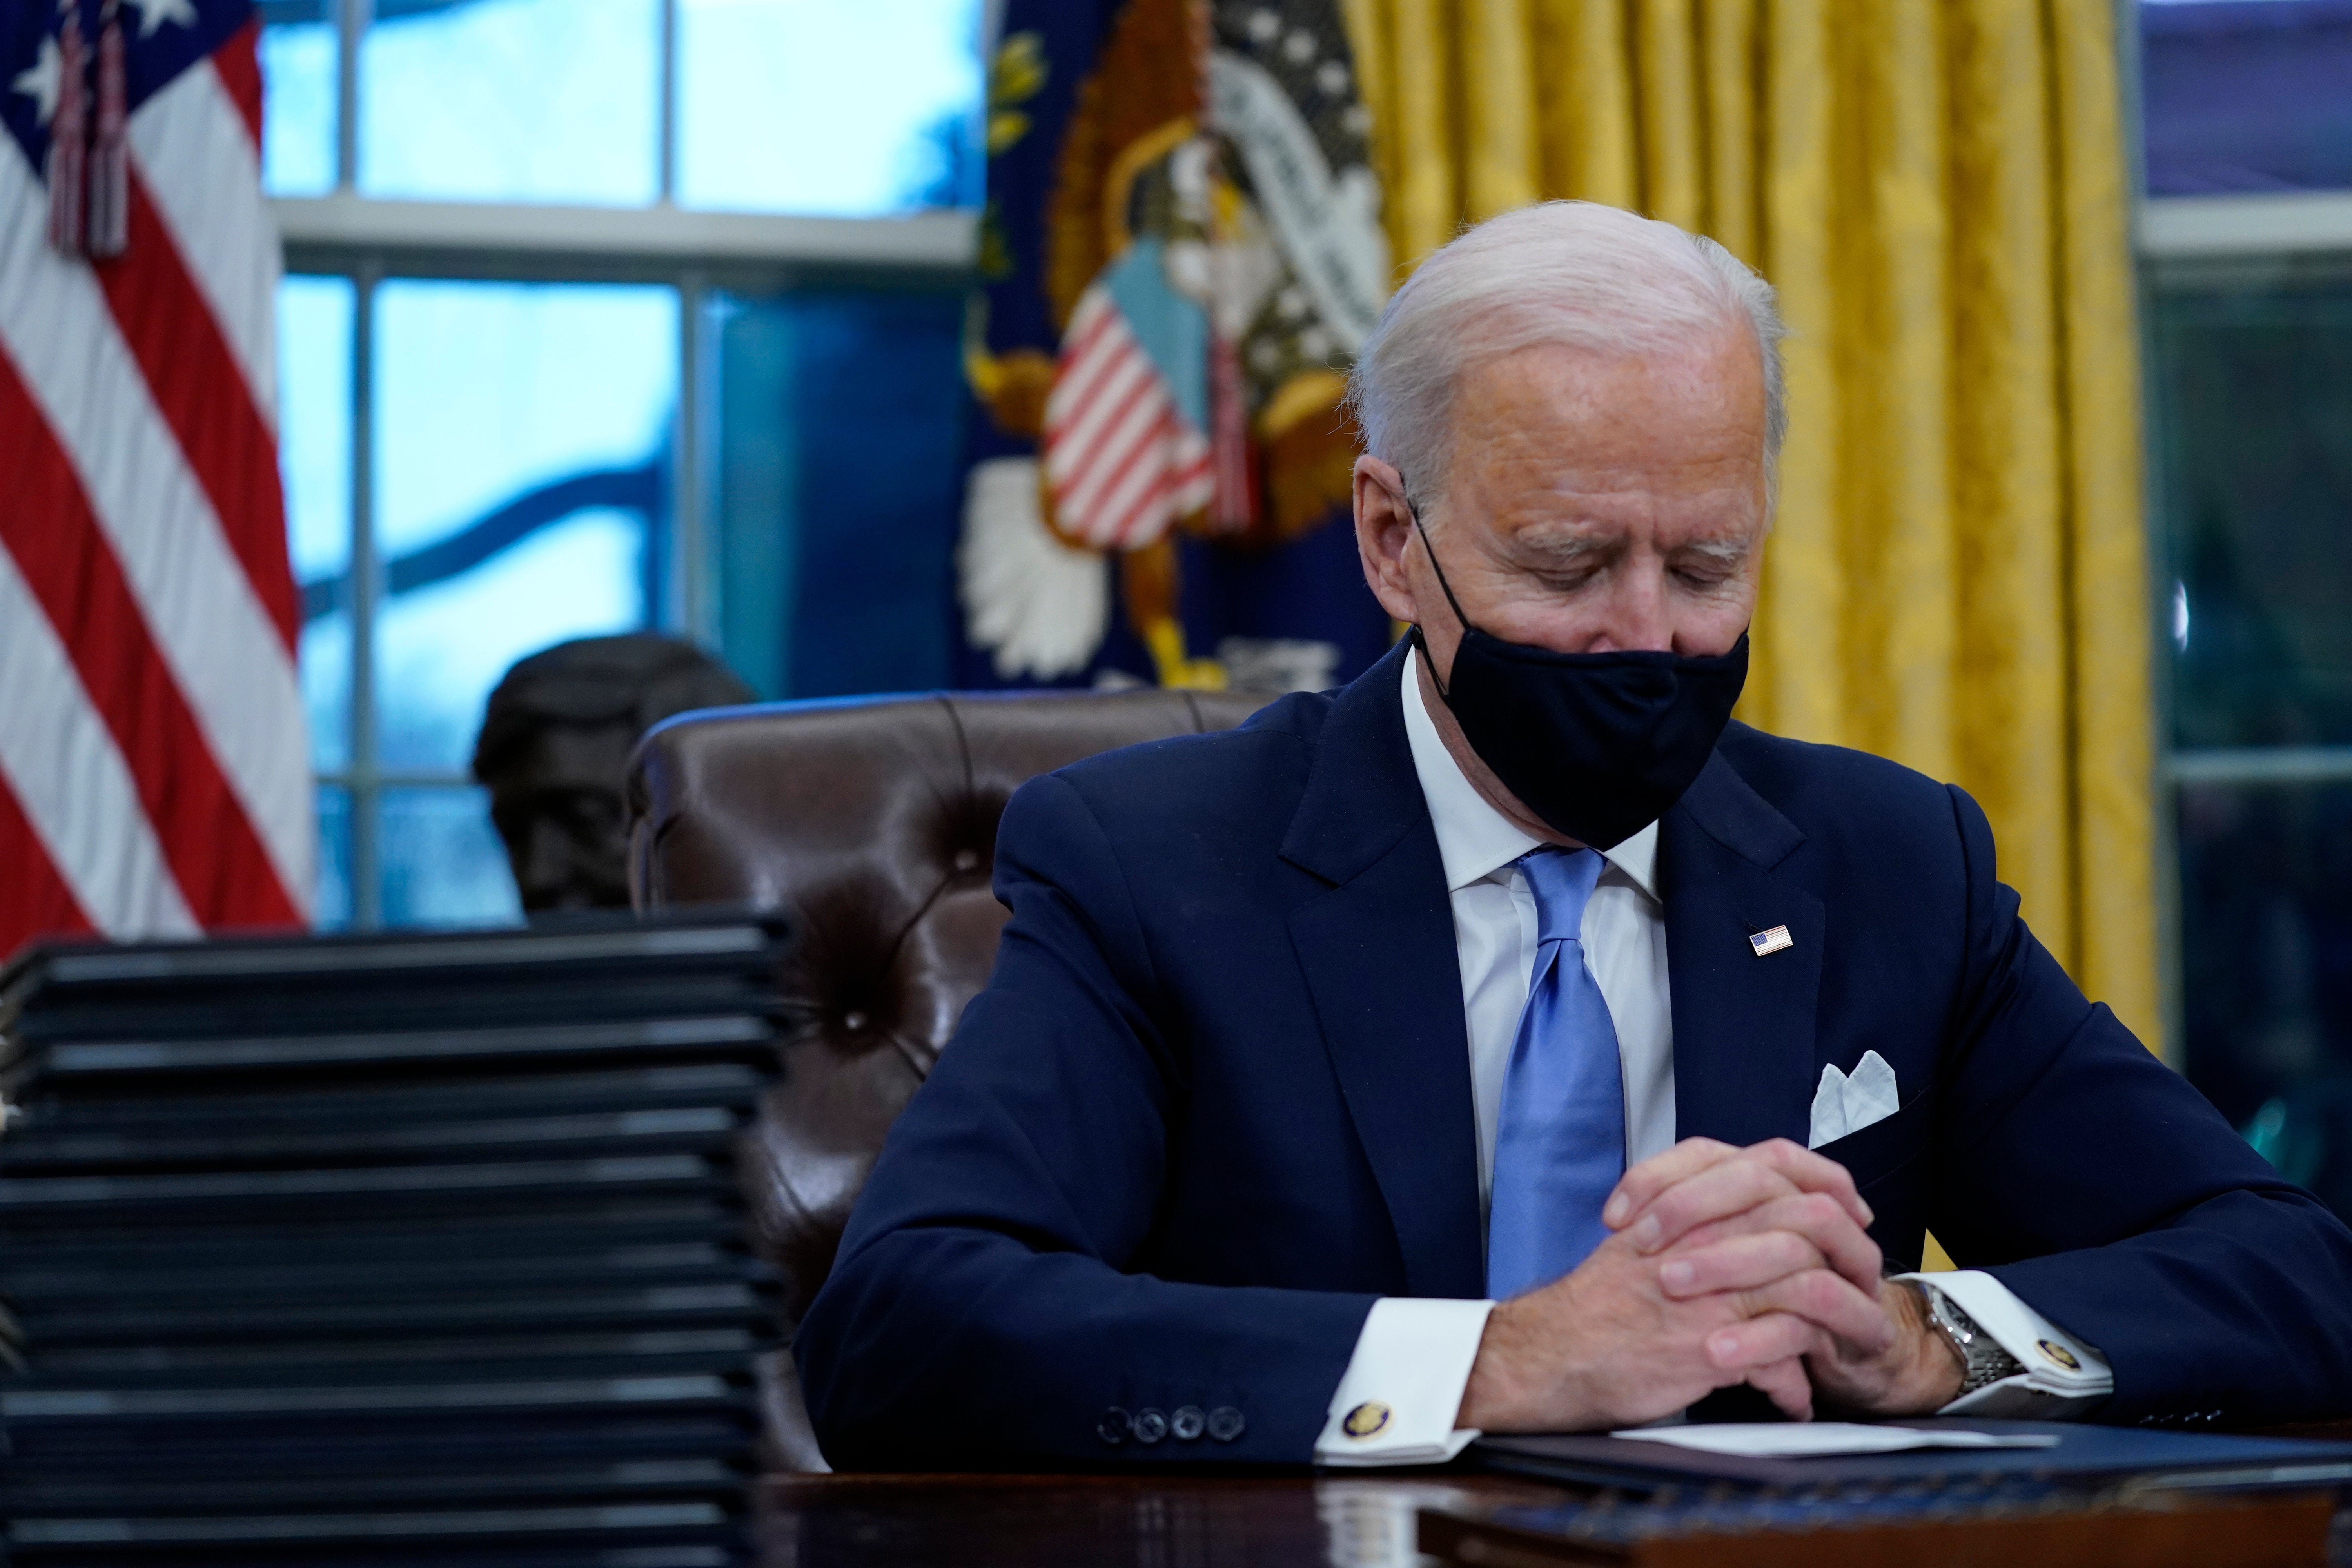 Signing a series of orders on his first day at Oval office, President Biden also passed an order to LGBTQ+ people from discrimination&nbsp;